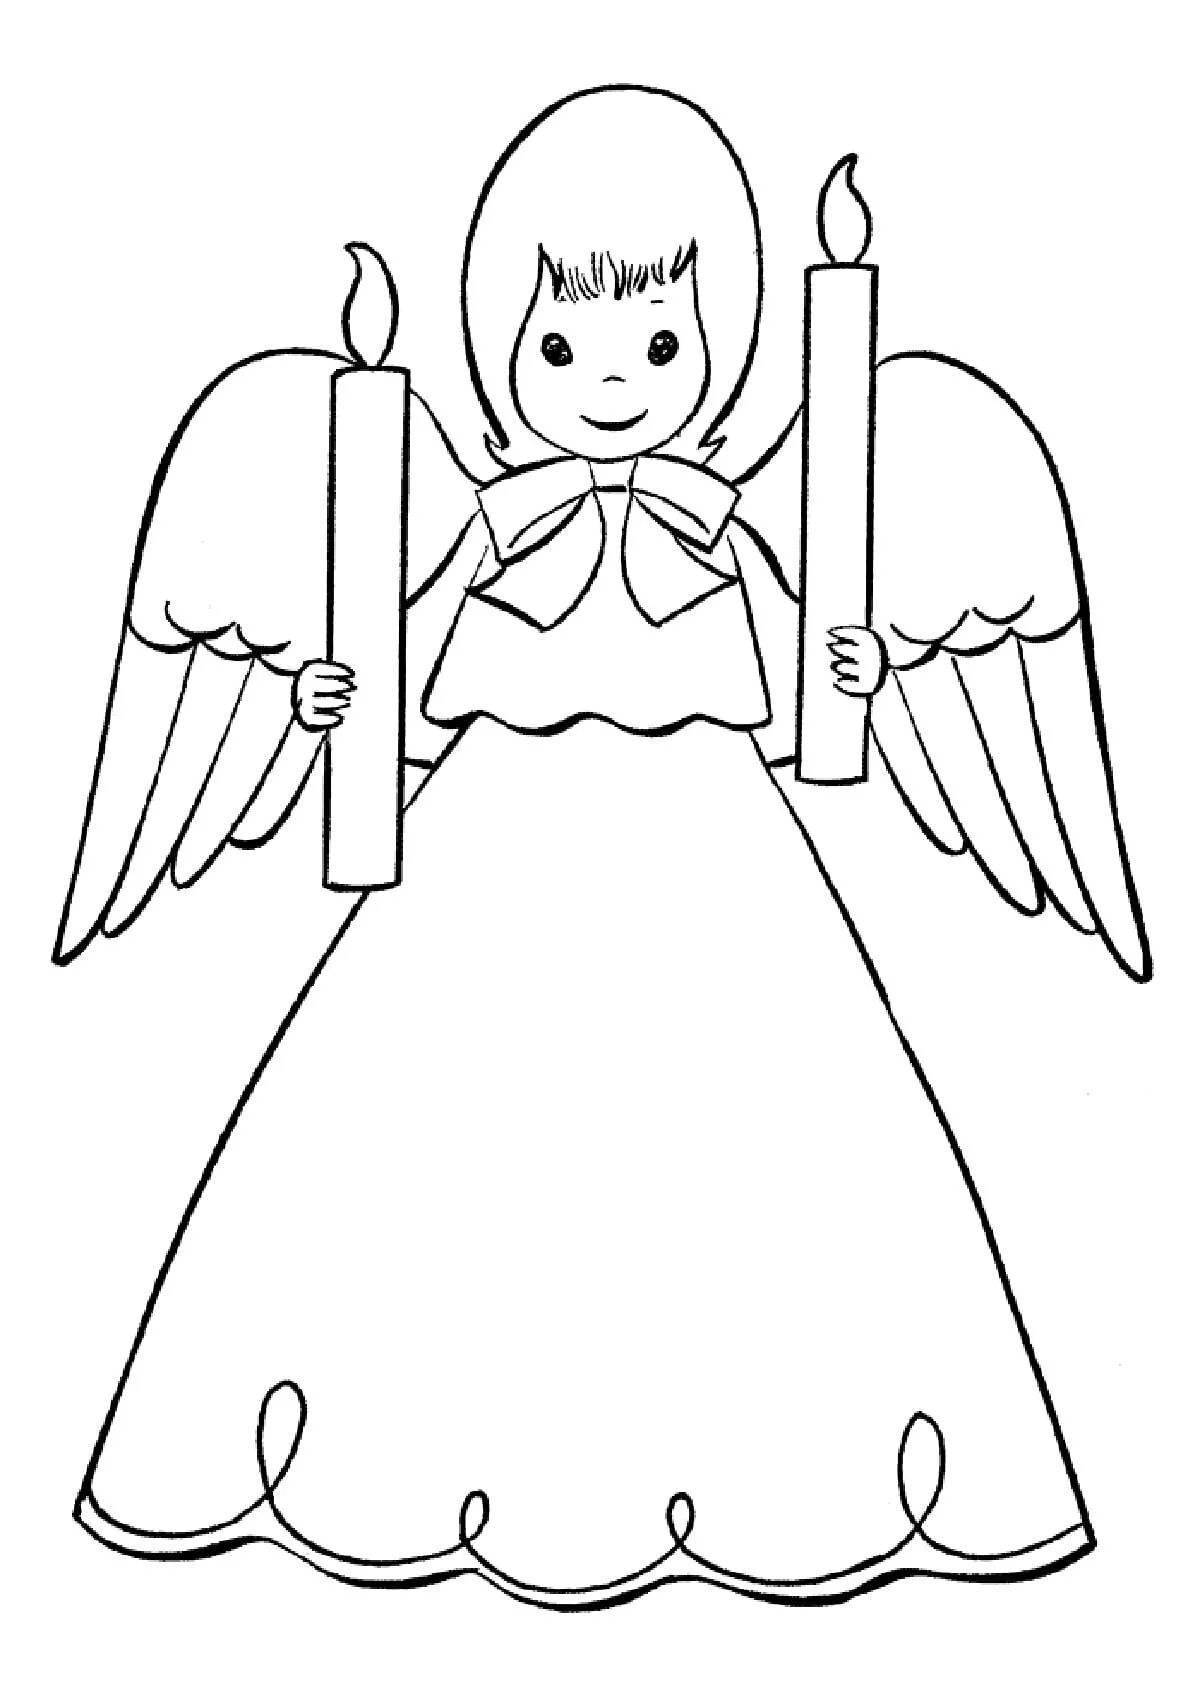 Great new year angel coloring book